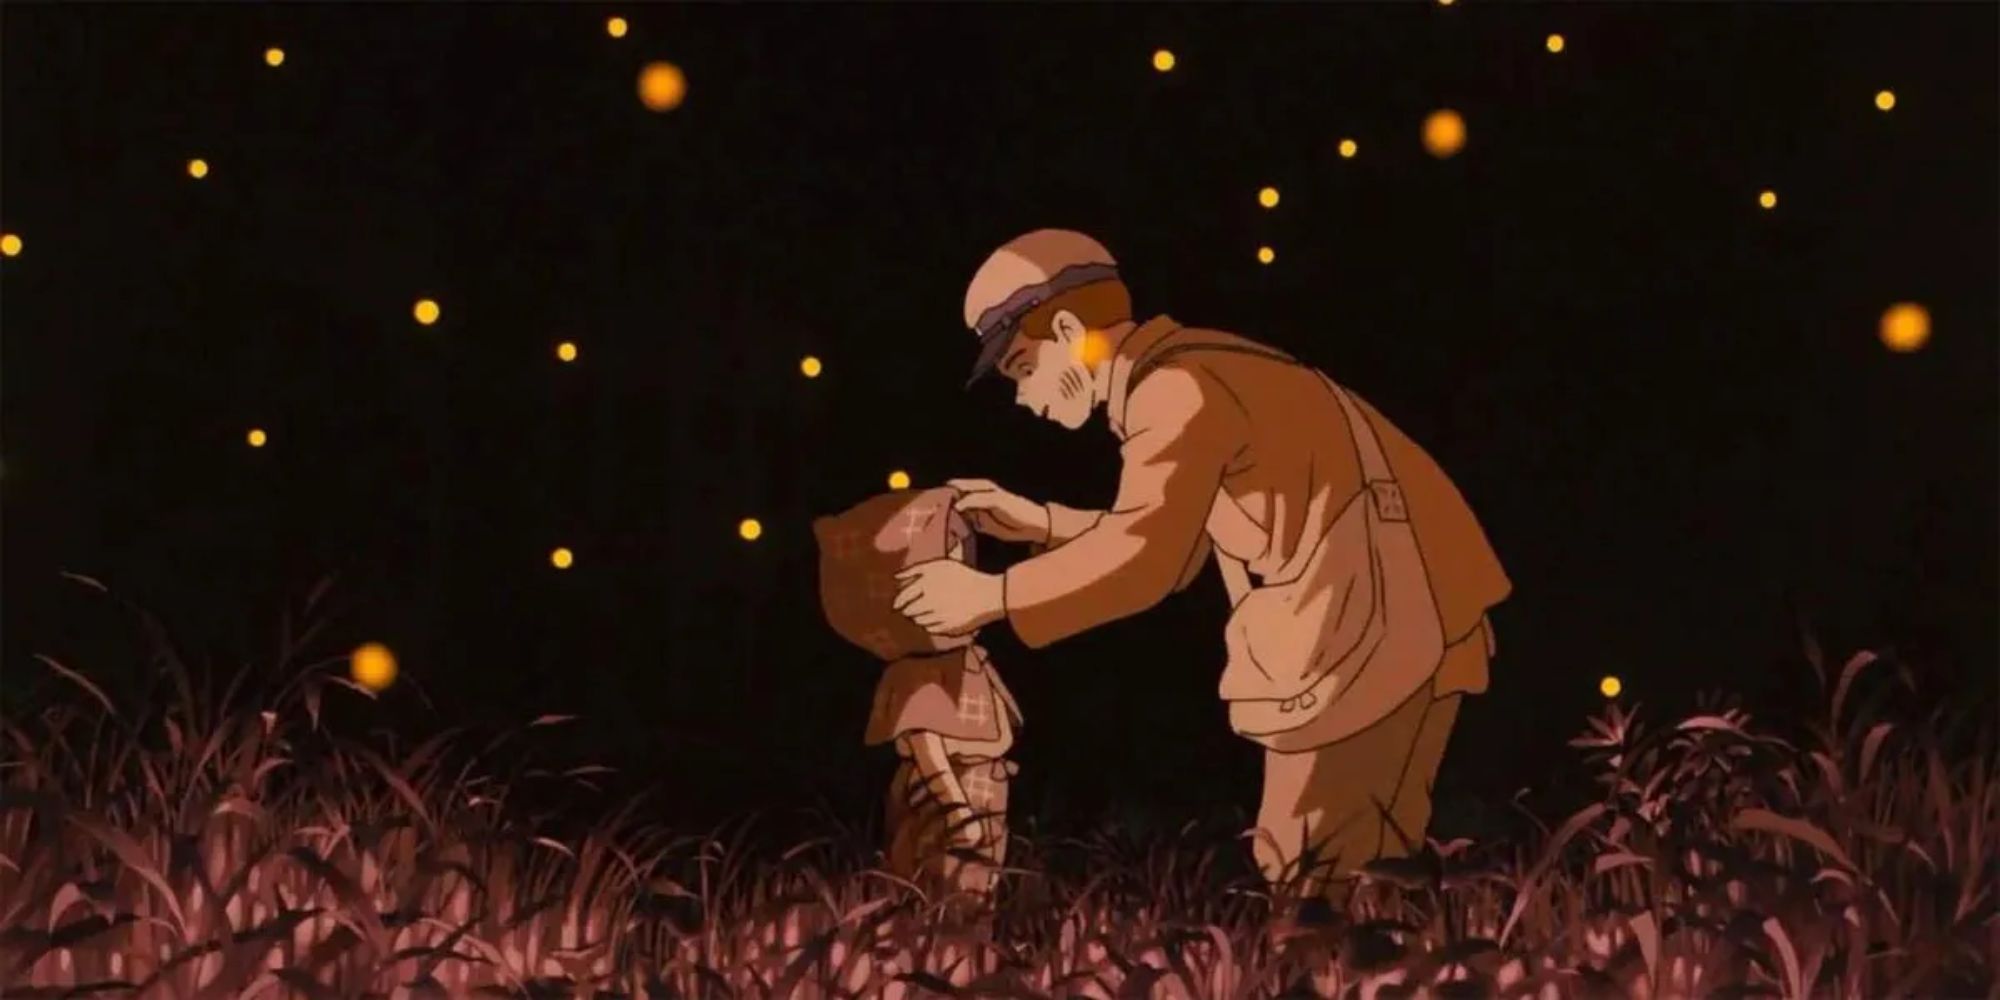 Seita and Setsuko stand in the meadow at night as fireflies flutter around them